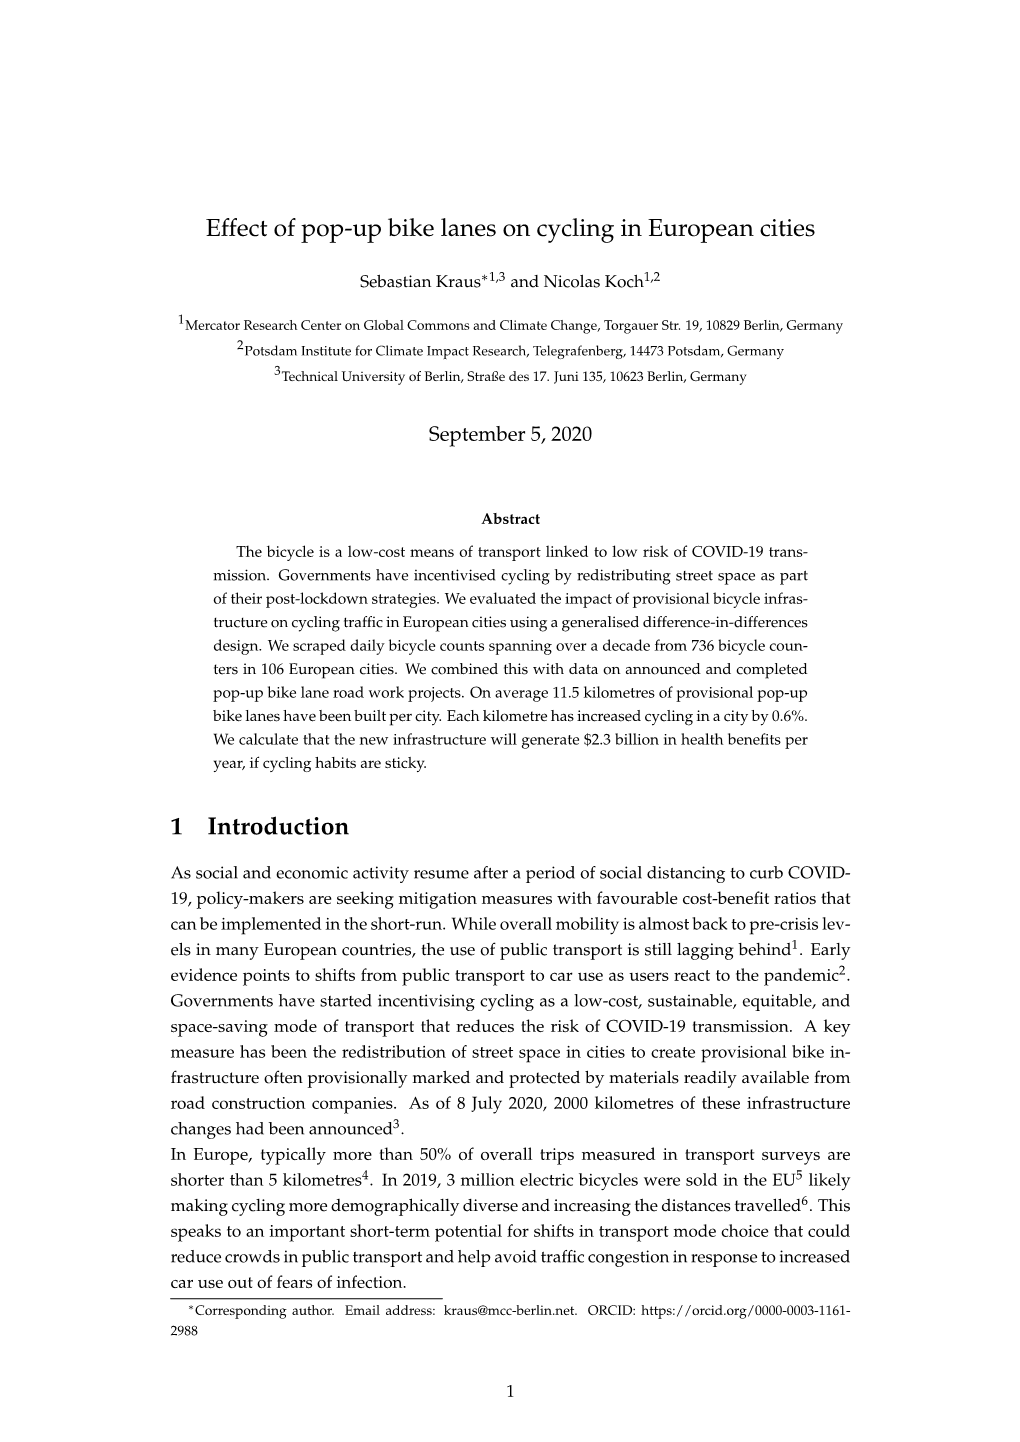 Effect of Pop-Up Bike Lanes on Cycling in European Cities 1 Introduction